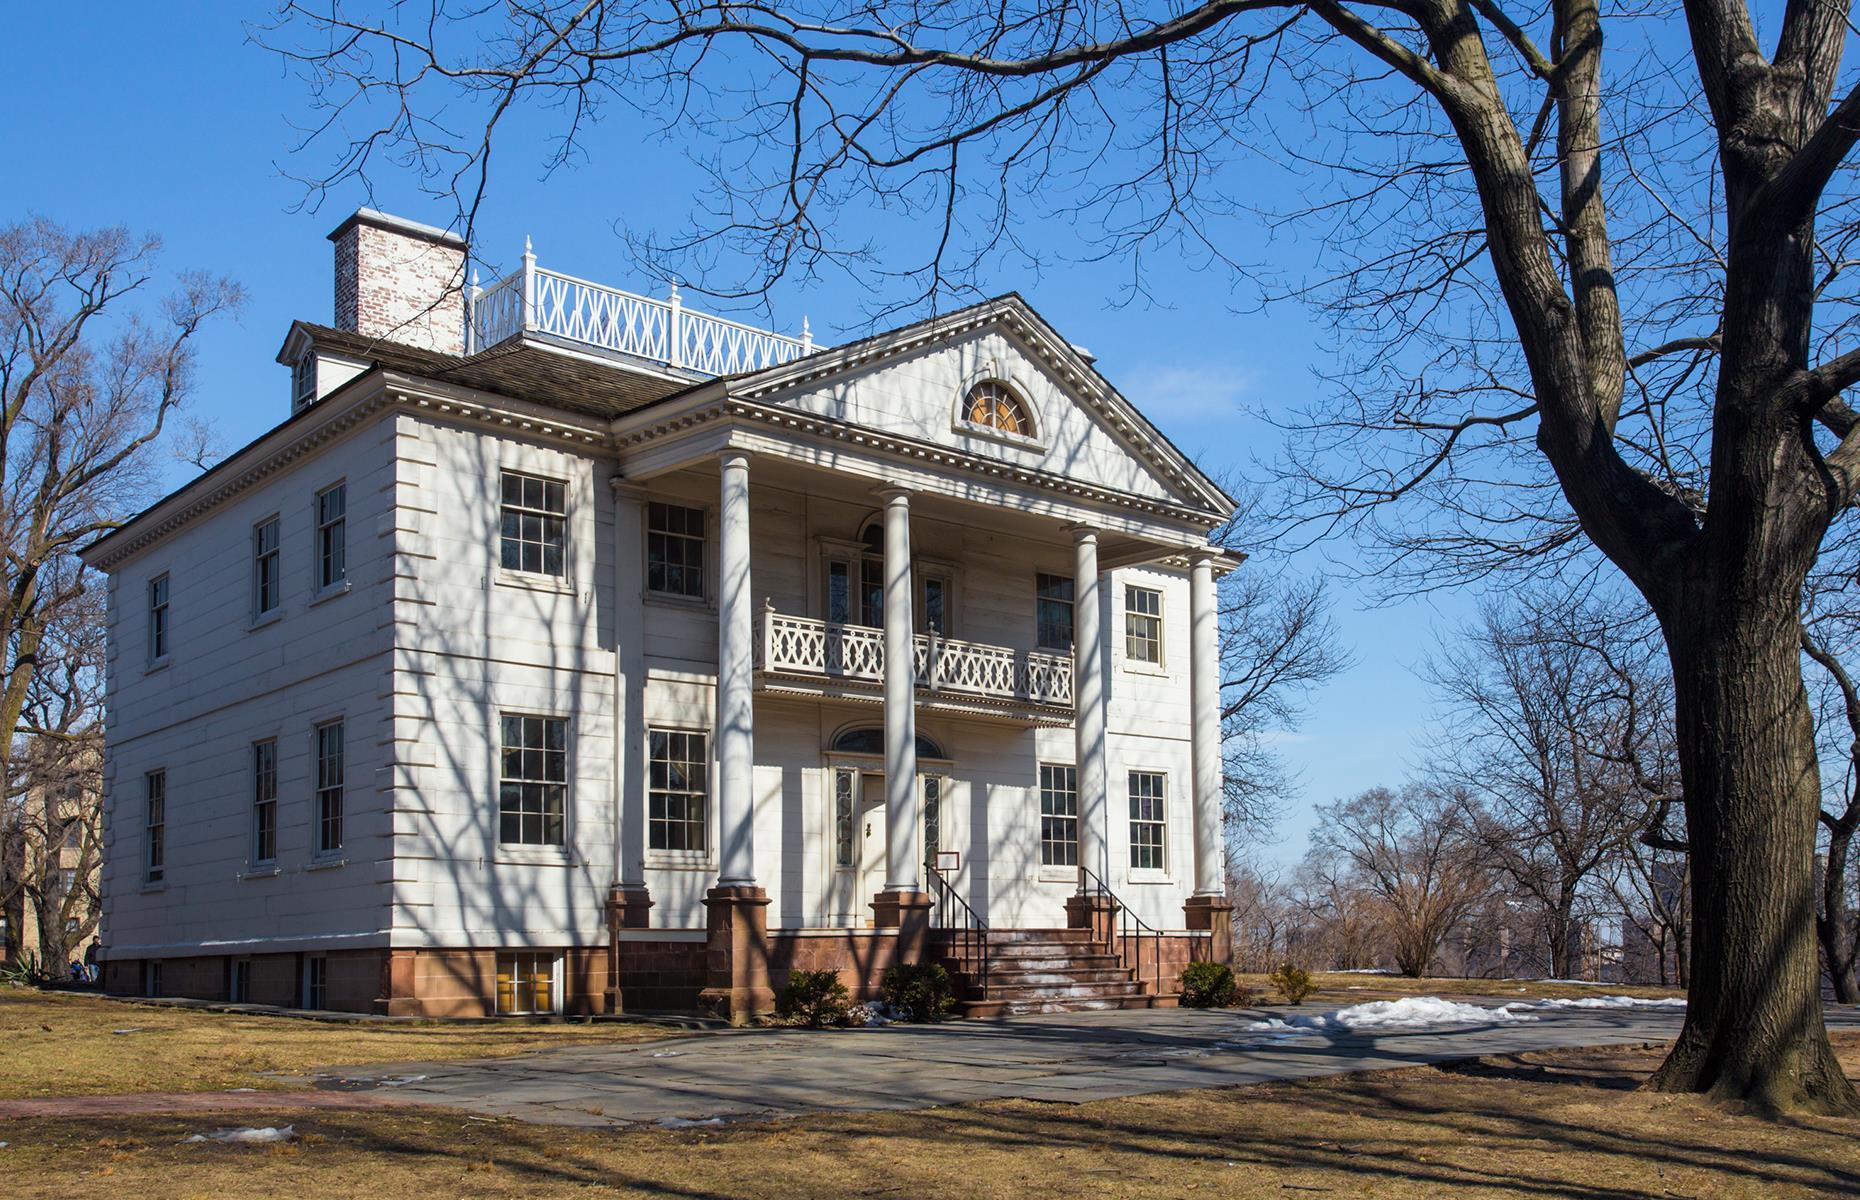 <p>New York City has a generous helping of haunted locations, and among them is the 18th-century <a href="https://www.morrisjumel.org/">Morris-Jumel Mansion</a>, the former summer retreat of English colonel Roger Morris. Beyond being a private residence, it also served as an American Revolutionary War HQ and a raucous tavern – and it's said that spirits still linger from across the decades. Paranormal investigations here go in search of the mansion's notorious spectral residents.</p>